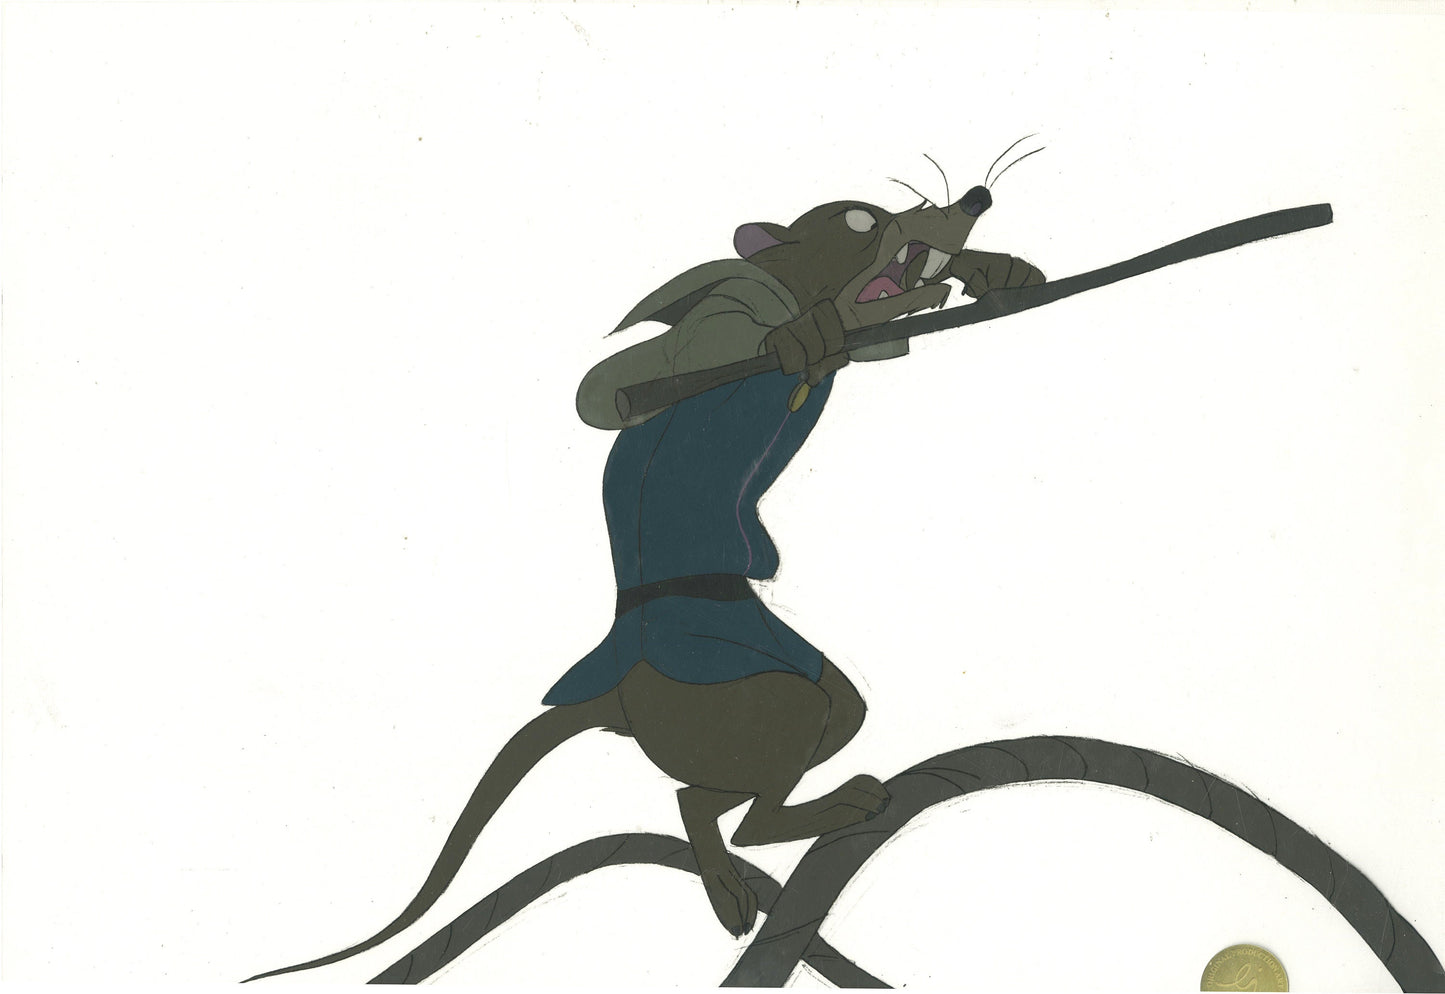 Don Bluth Secret of NIMH Justin 1982 Original Production Animation Cel Used to make the cartoon 325-002